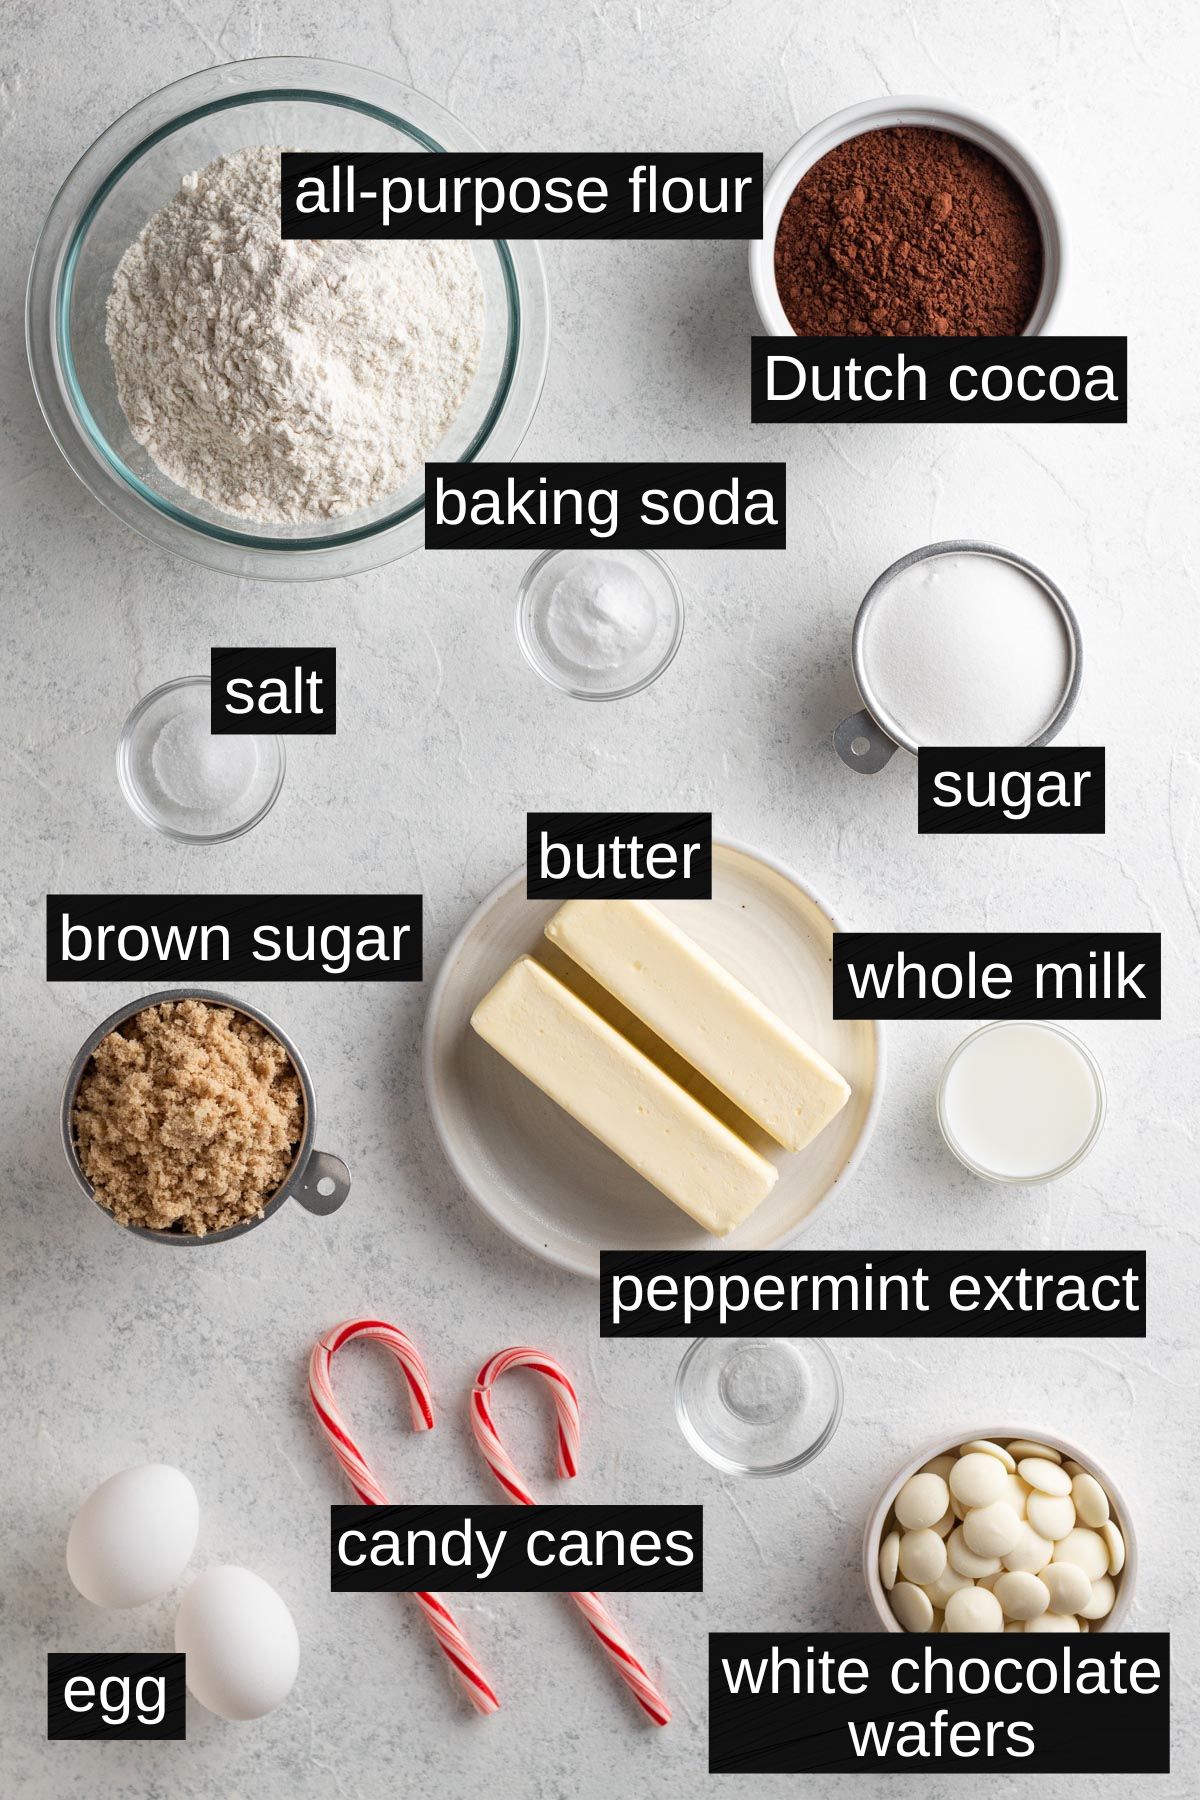 Recipe ingredients with labels on a gray surface.